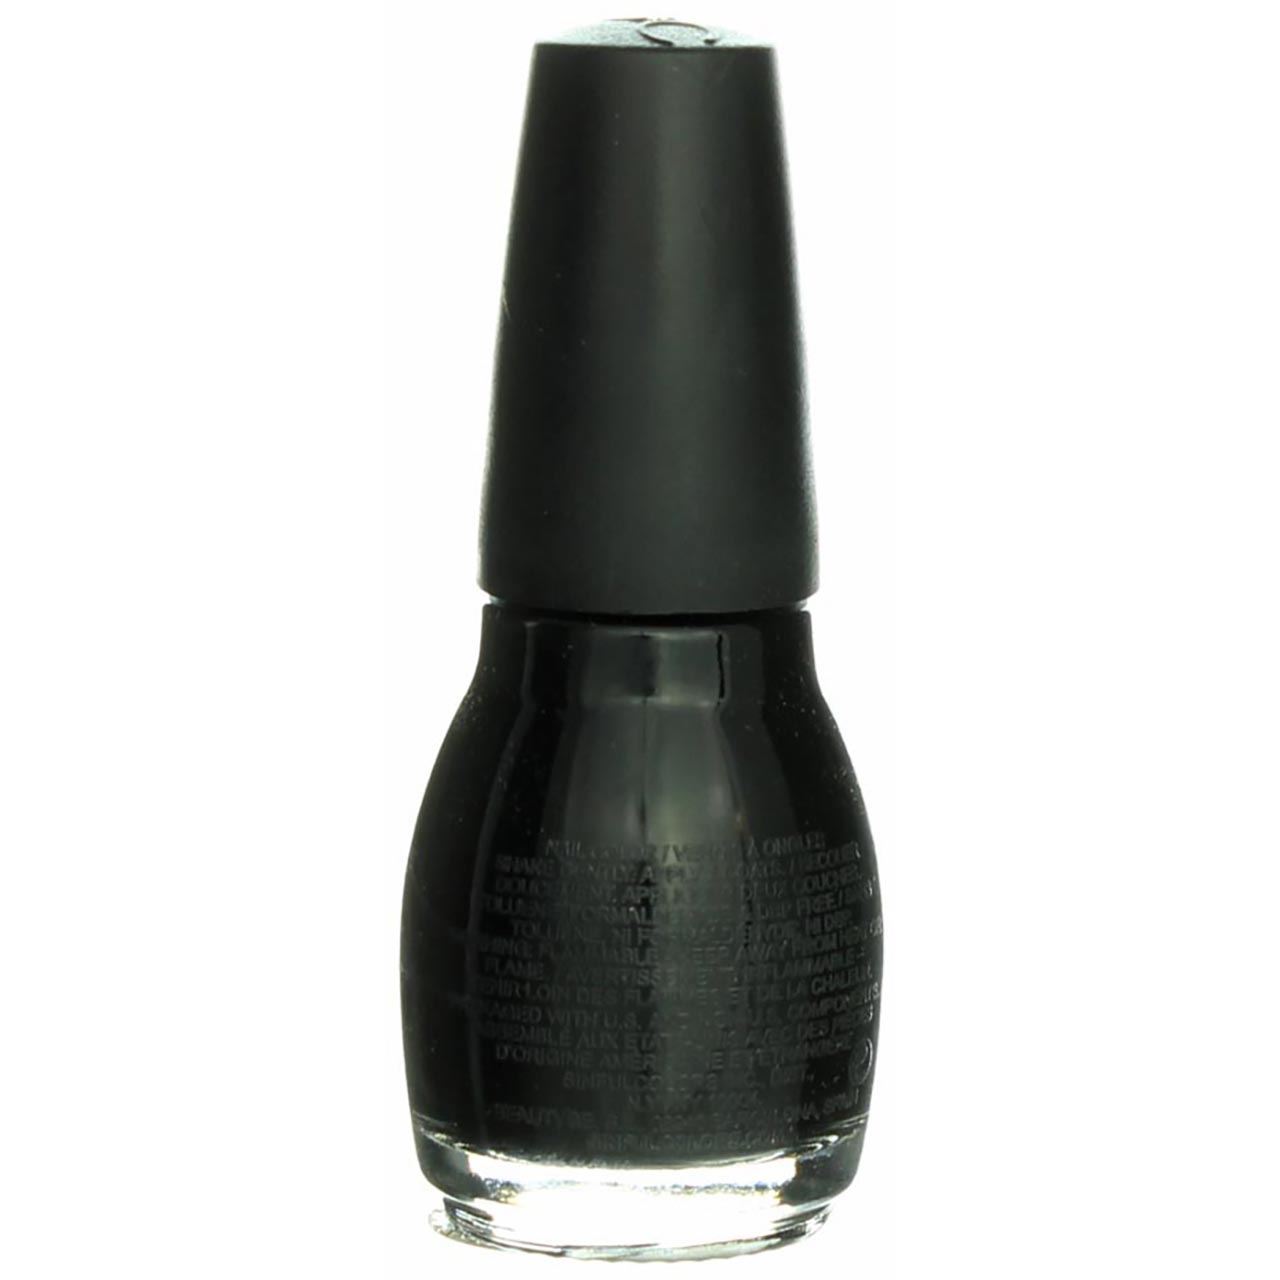 Sinful Colors Professional Nail Enamel, Black On Black 0.50 oz (Pack of 3) - image 3 of 4